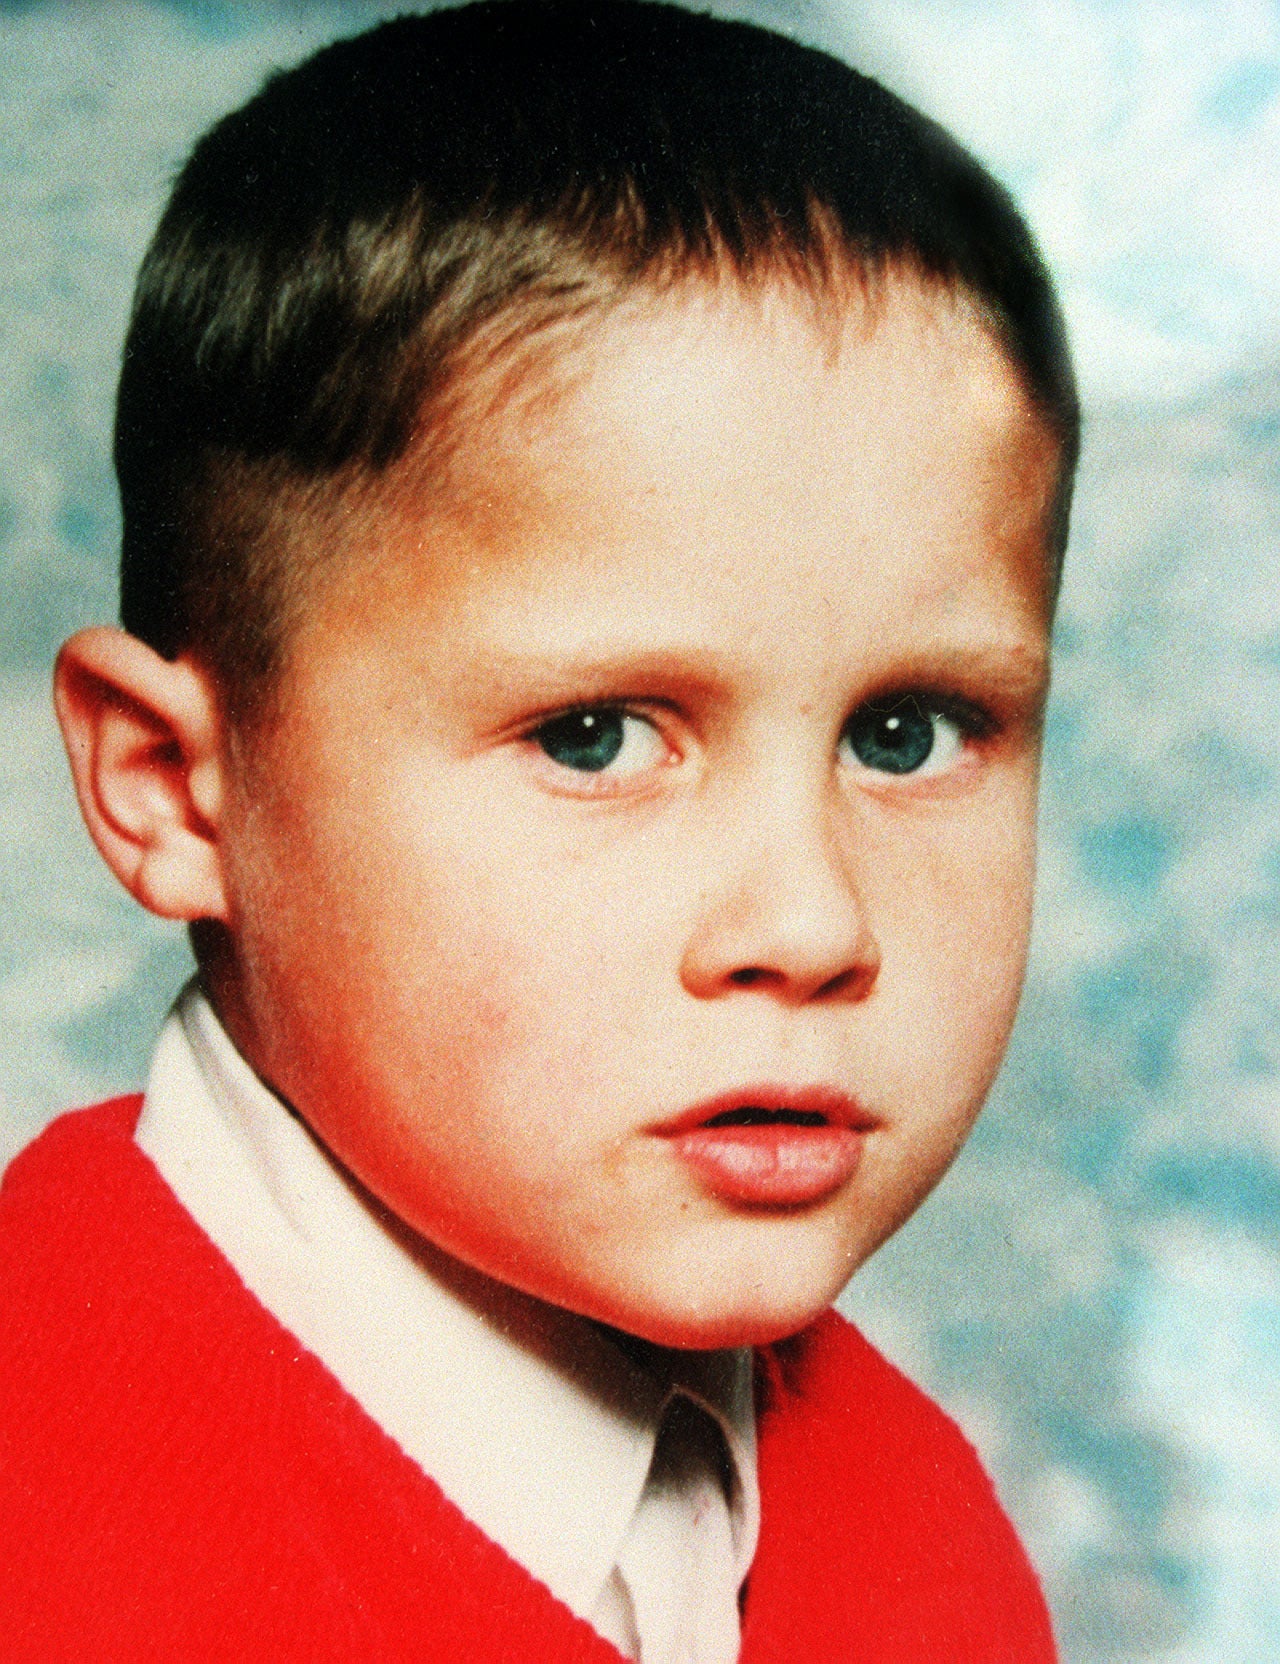 A pensioner has described seeing six-year-old Rikki Neave with his alleged killer on the day he was murdered 27 years ago (Handout/PA)